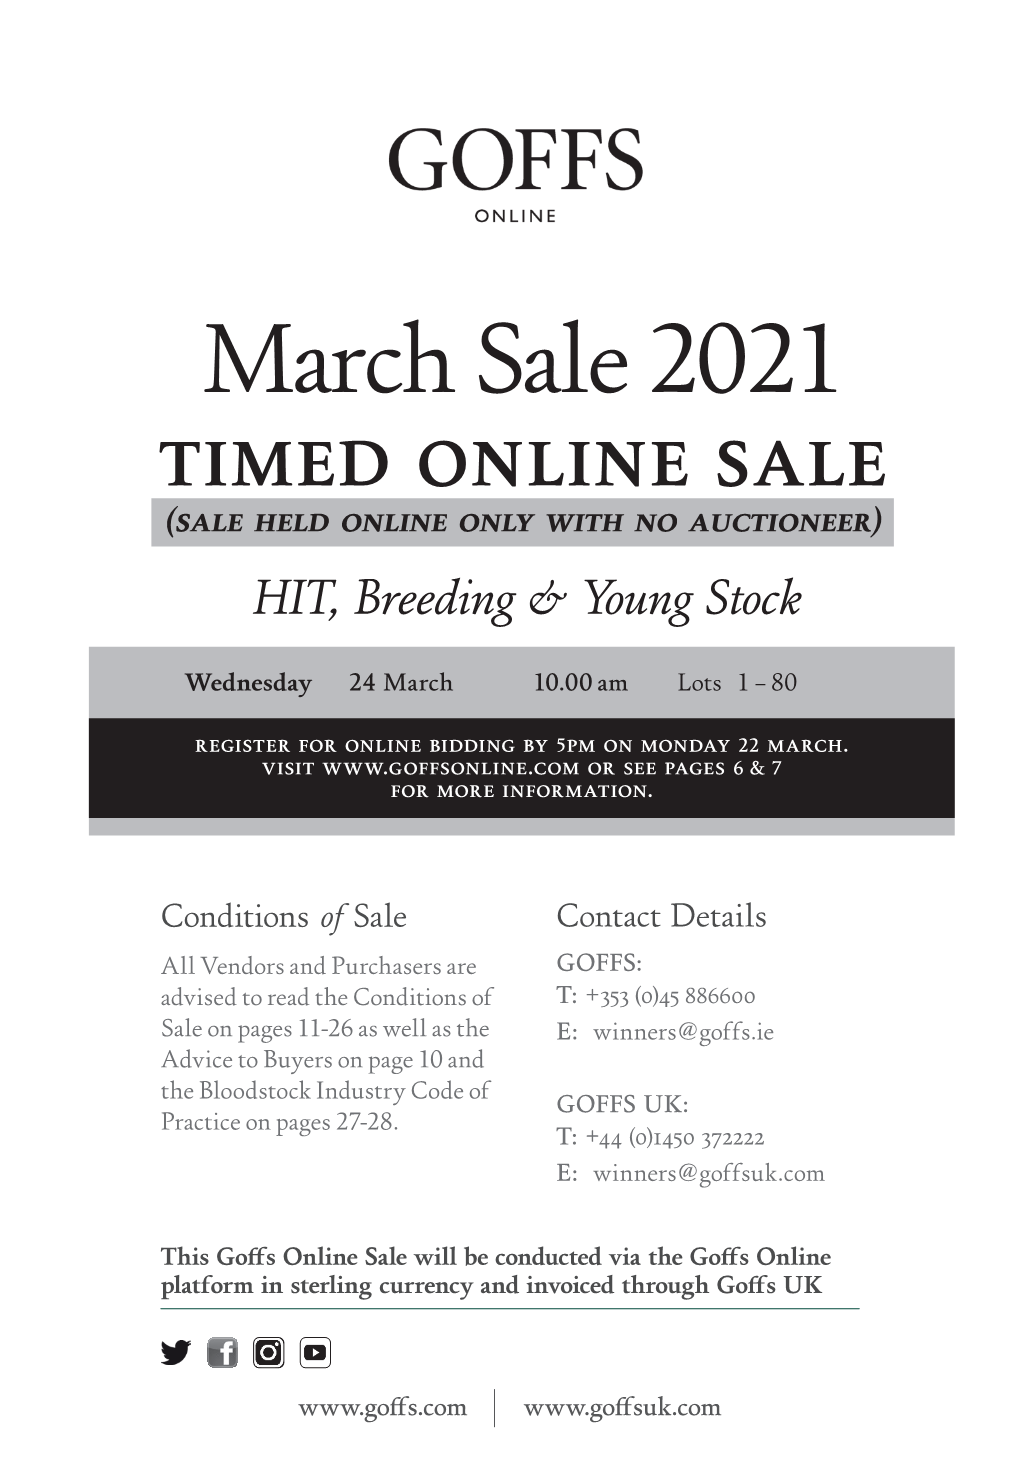 March Sale 2021 TIMED ONLINE SALE (Sale Held Online Only with No Auctioneer) HIT, Breeding & Young Stock